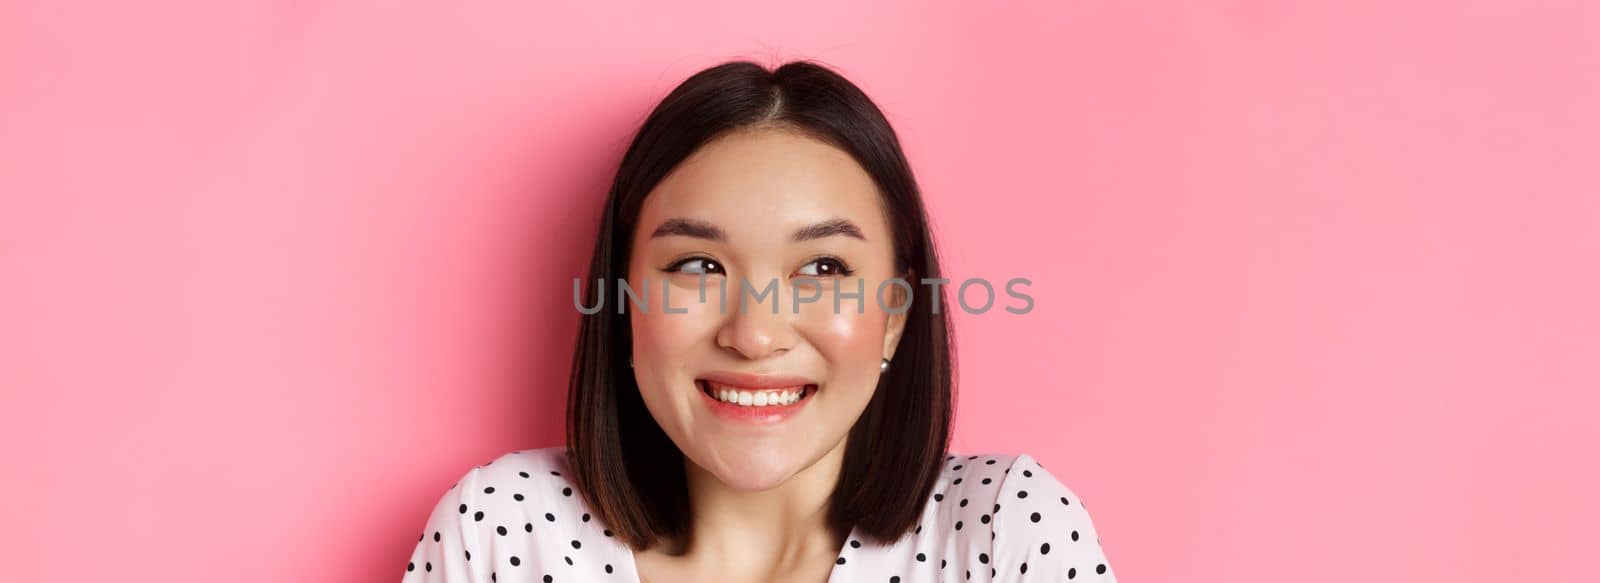 Beauty and lifestyle concept. Headshot of excited asian girl smiling, looking left at promo banner, standing over pink background. Copy space